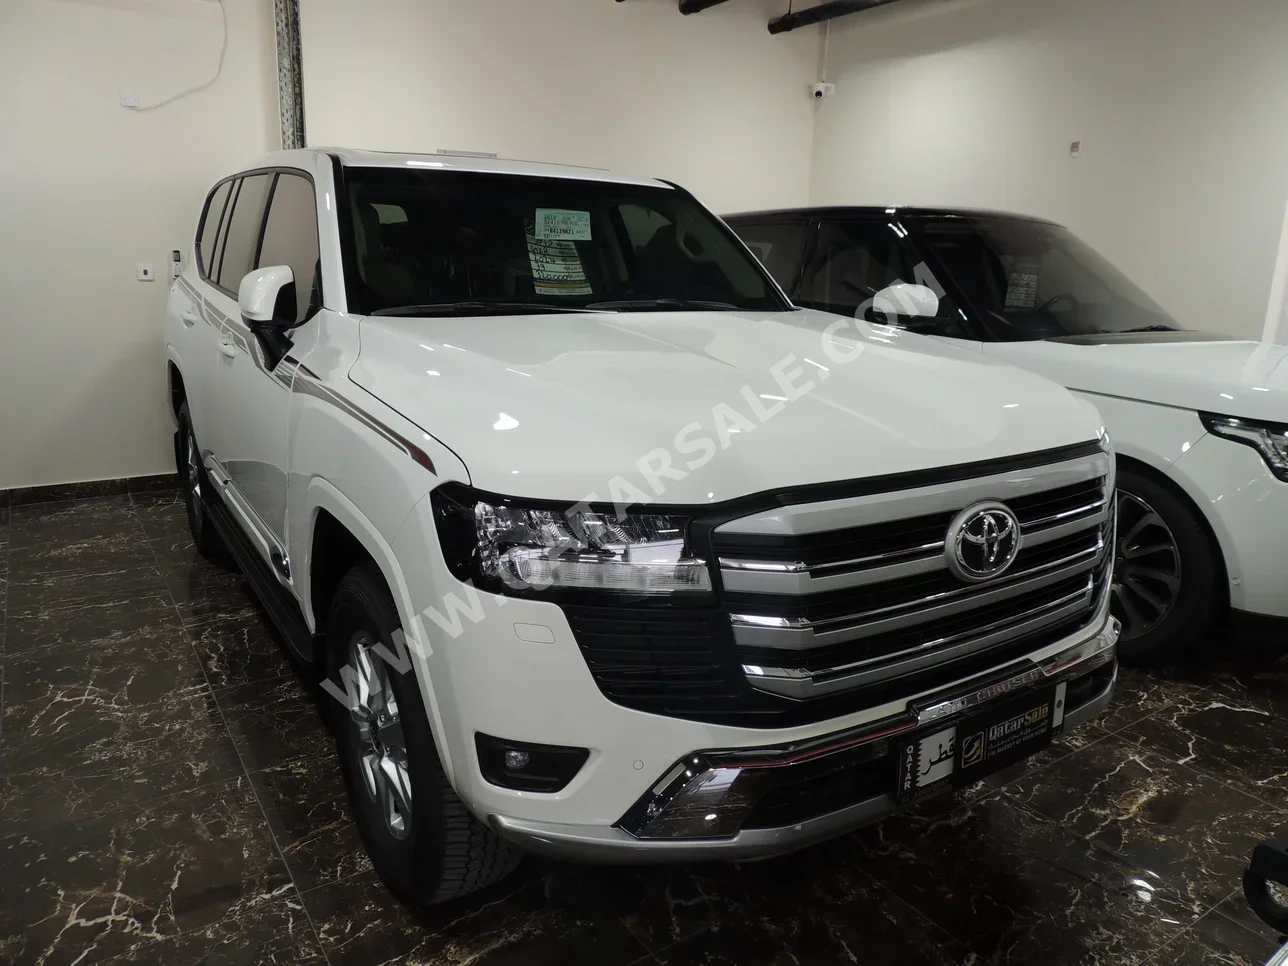 Toyota  Land Cruiser  GXR  2024  Automatic  79 Km  6 Cylinder  Four Wheel Drive (4WD)  SUV  White  With Warranty